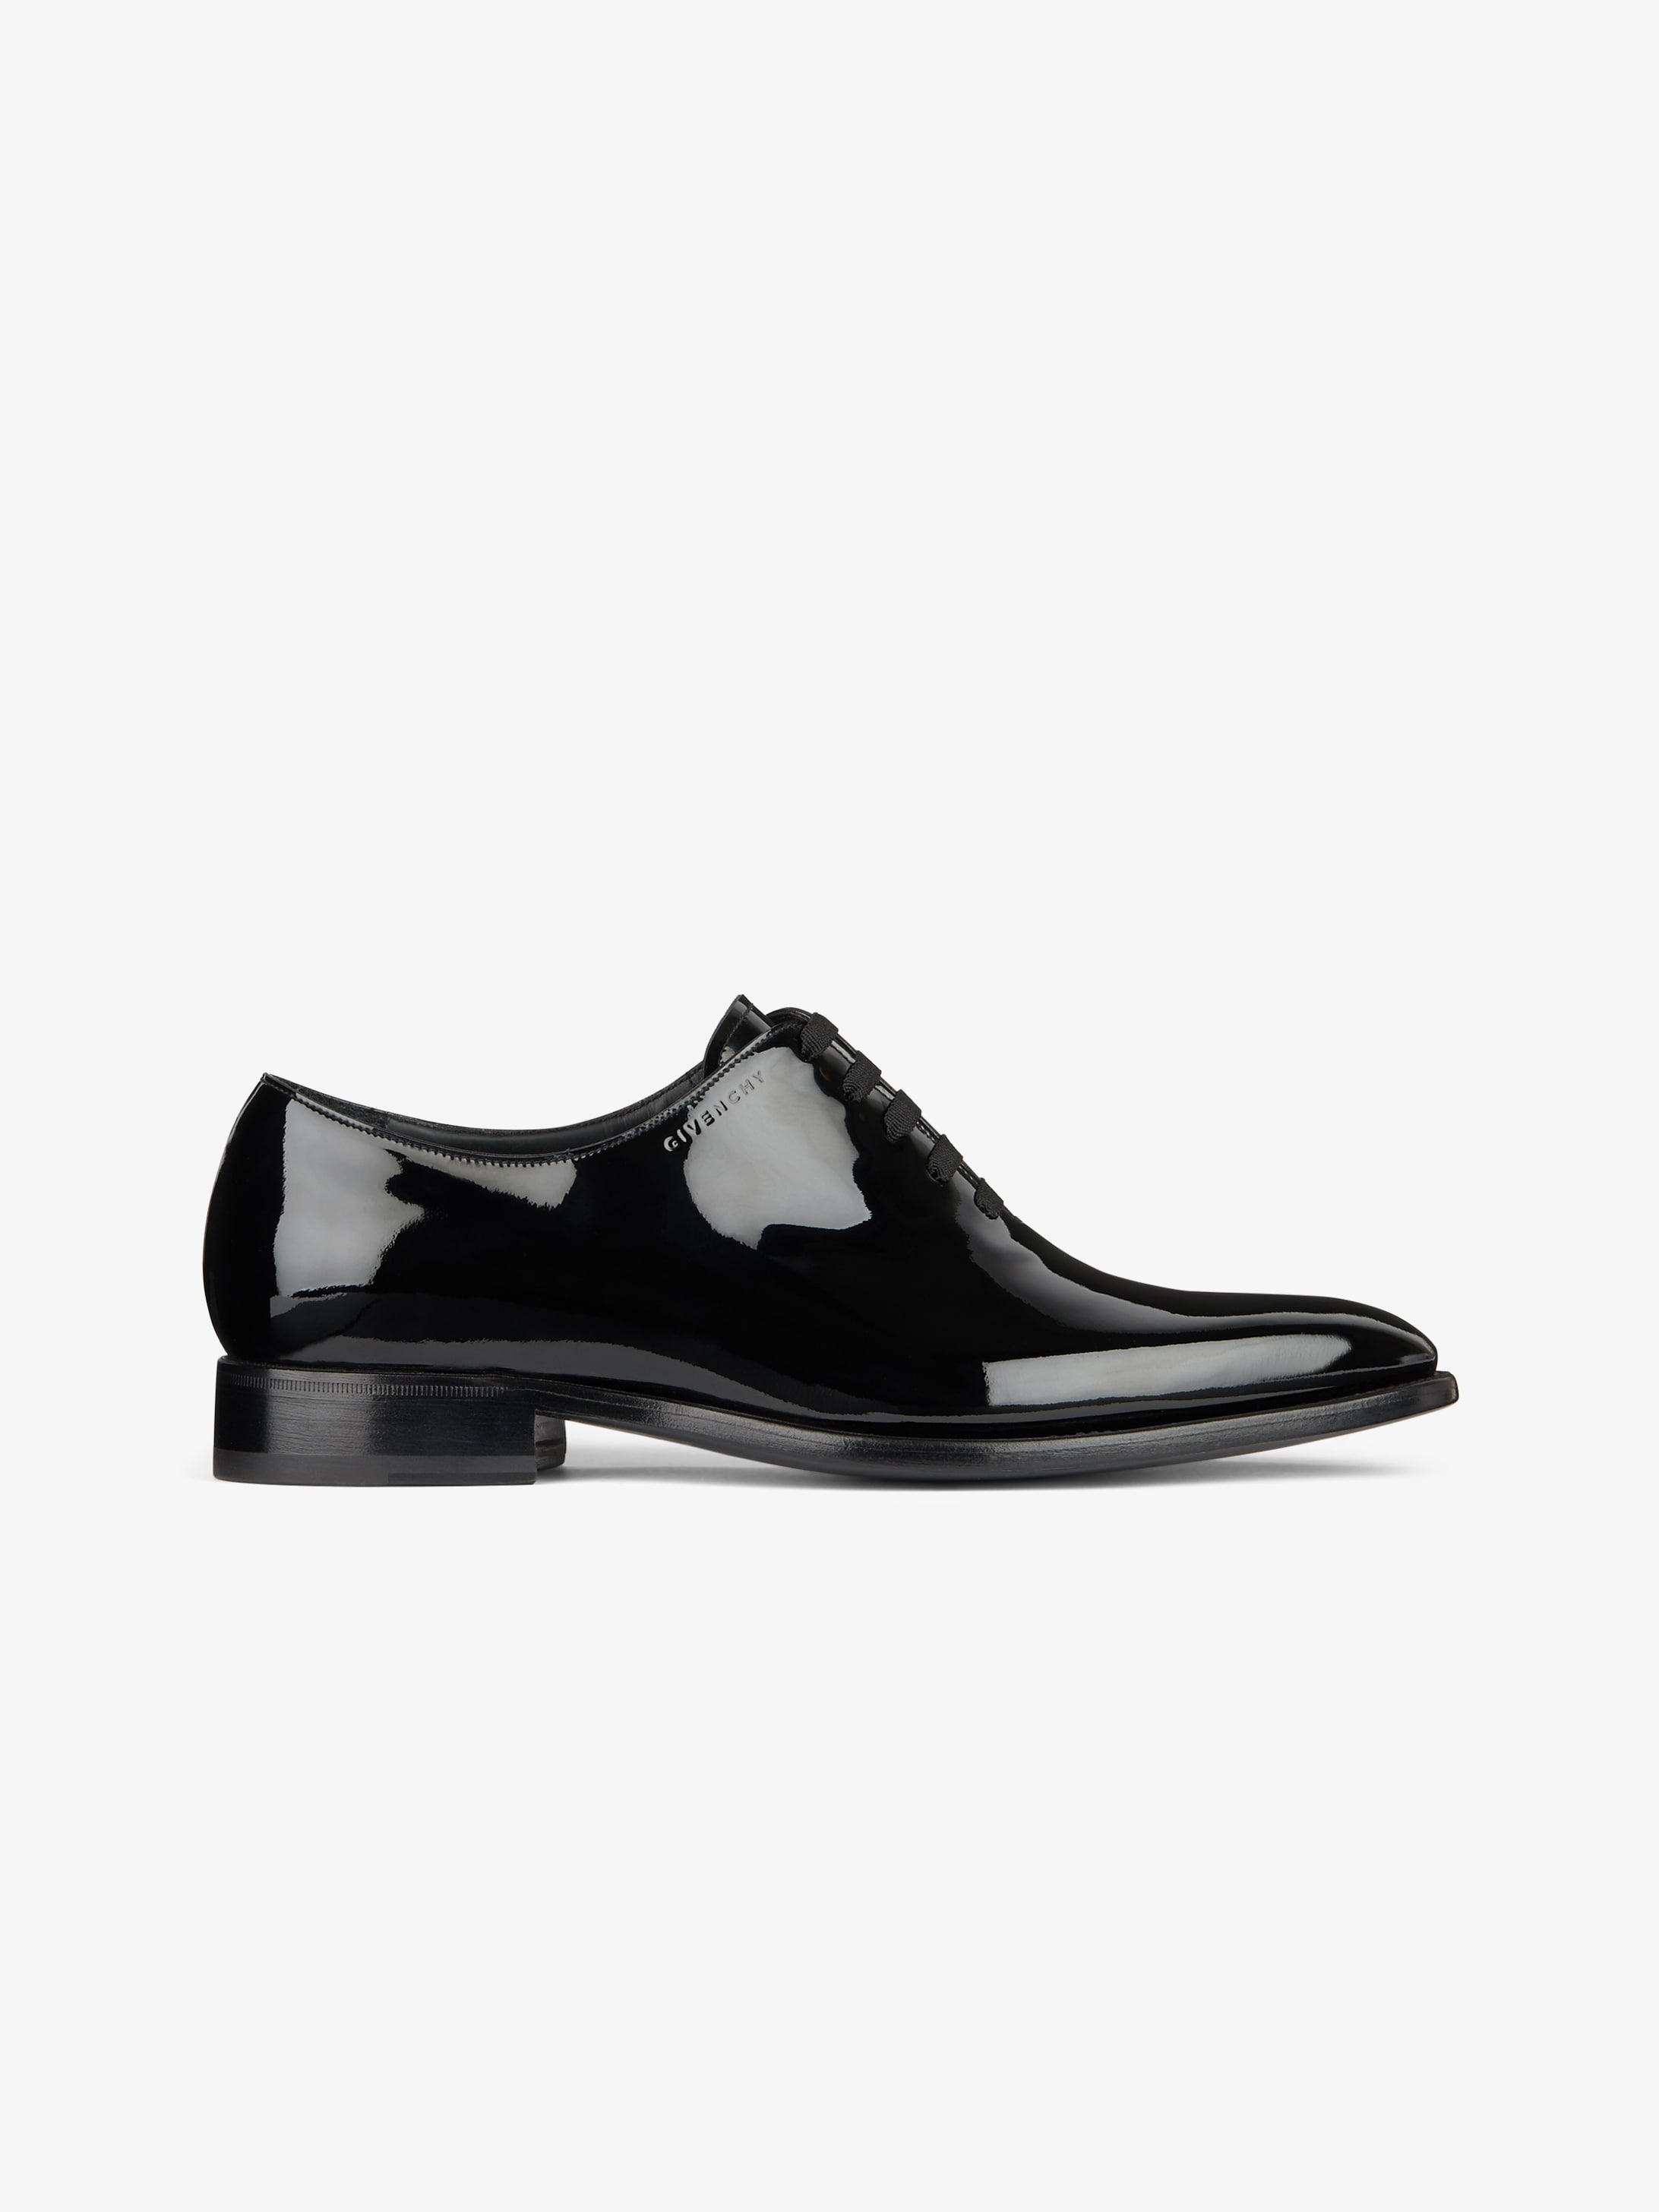 Derbies in leather | GIVENCHY Paris